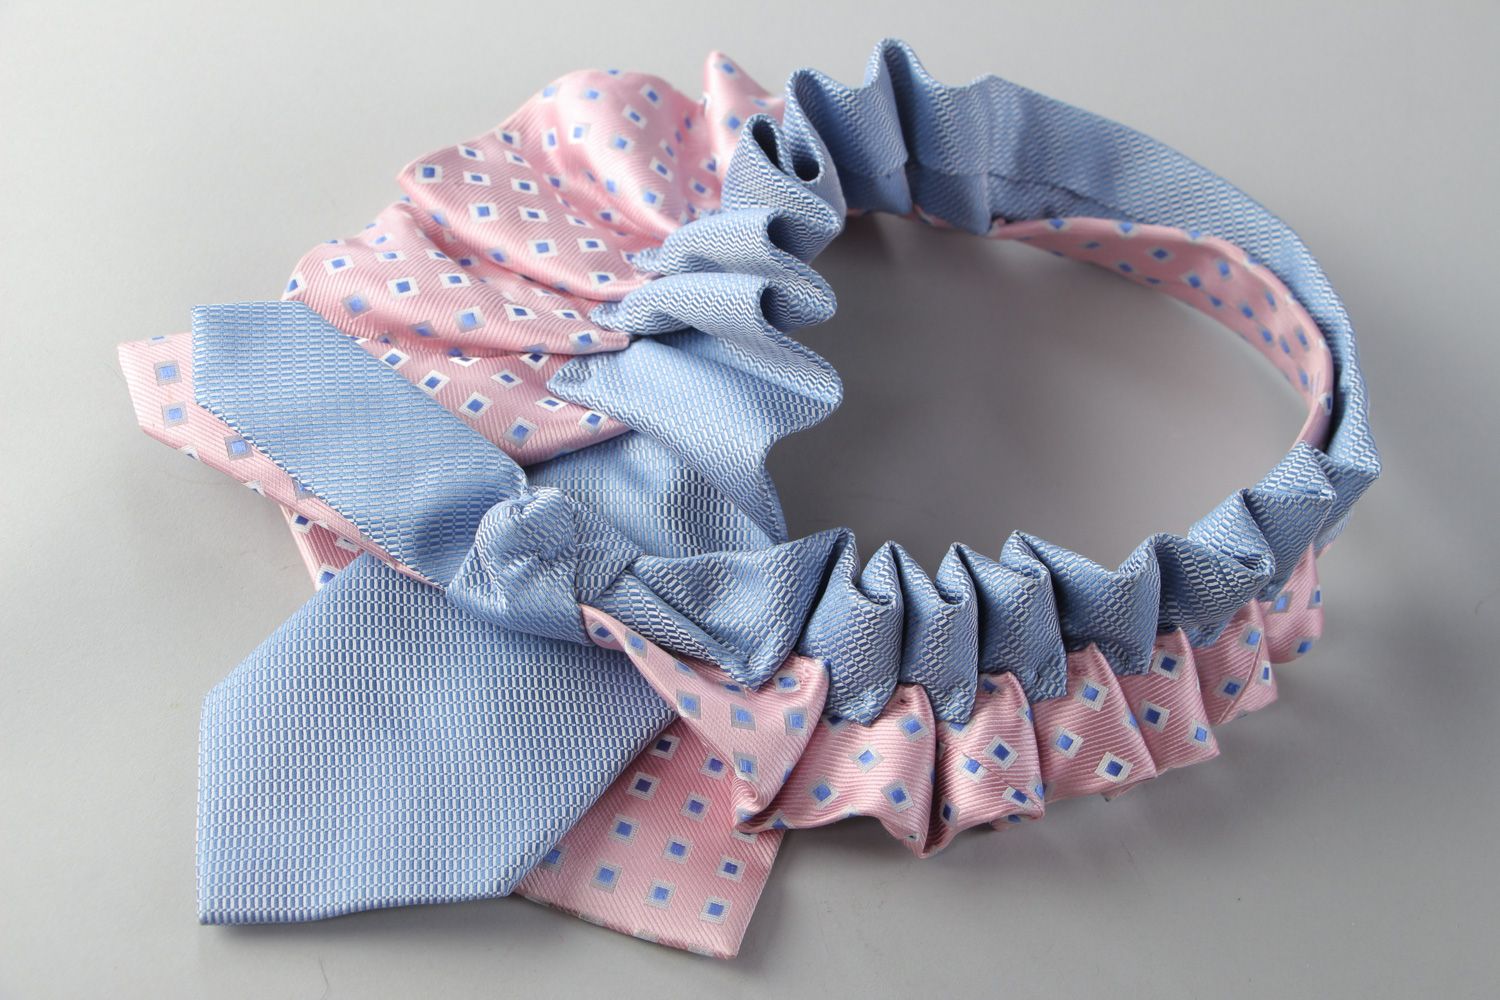 Tender fabric pink and blue collar necklace sewn of neck ties handmade photo 2